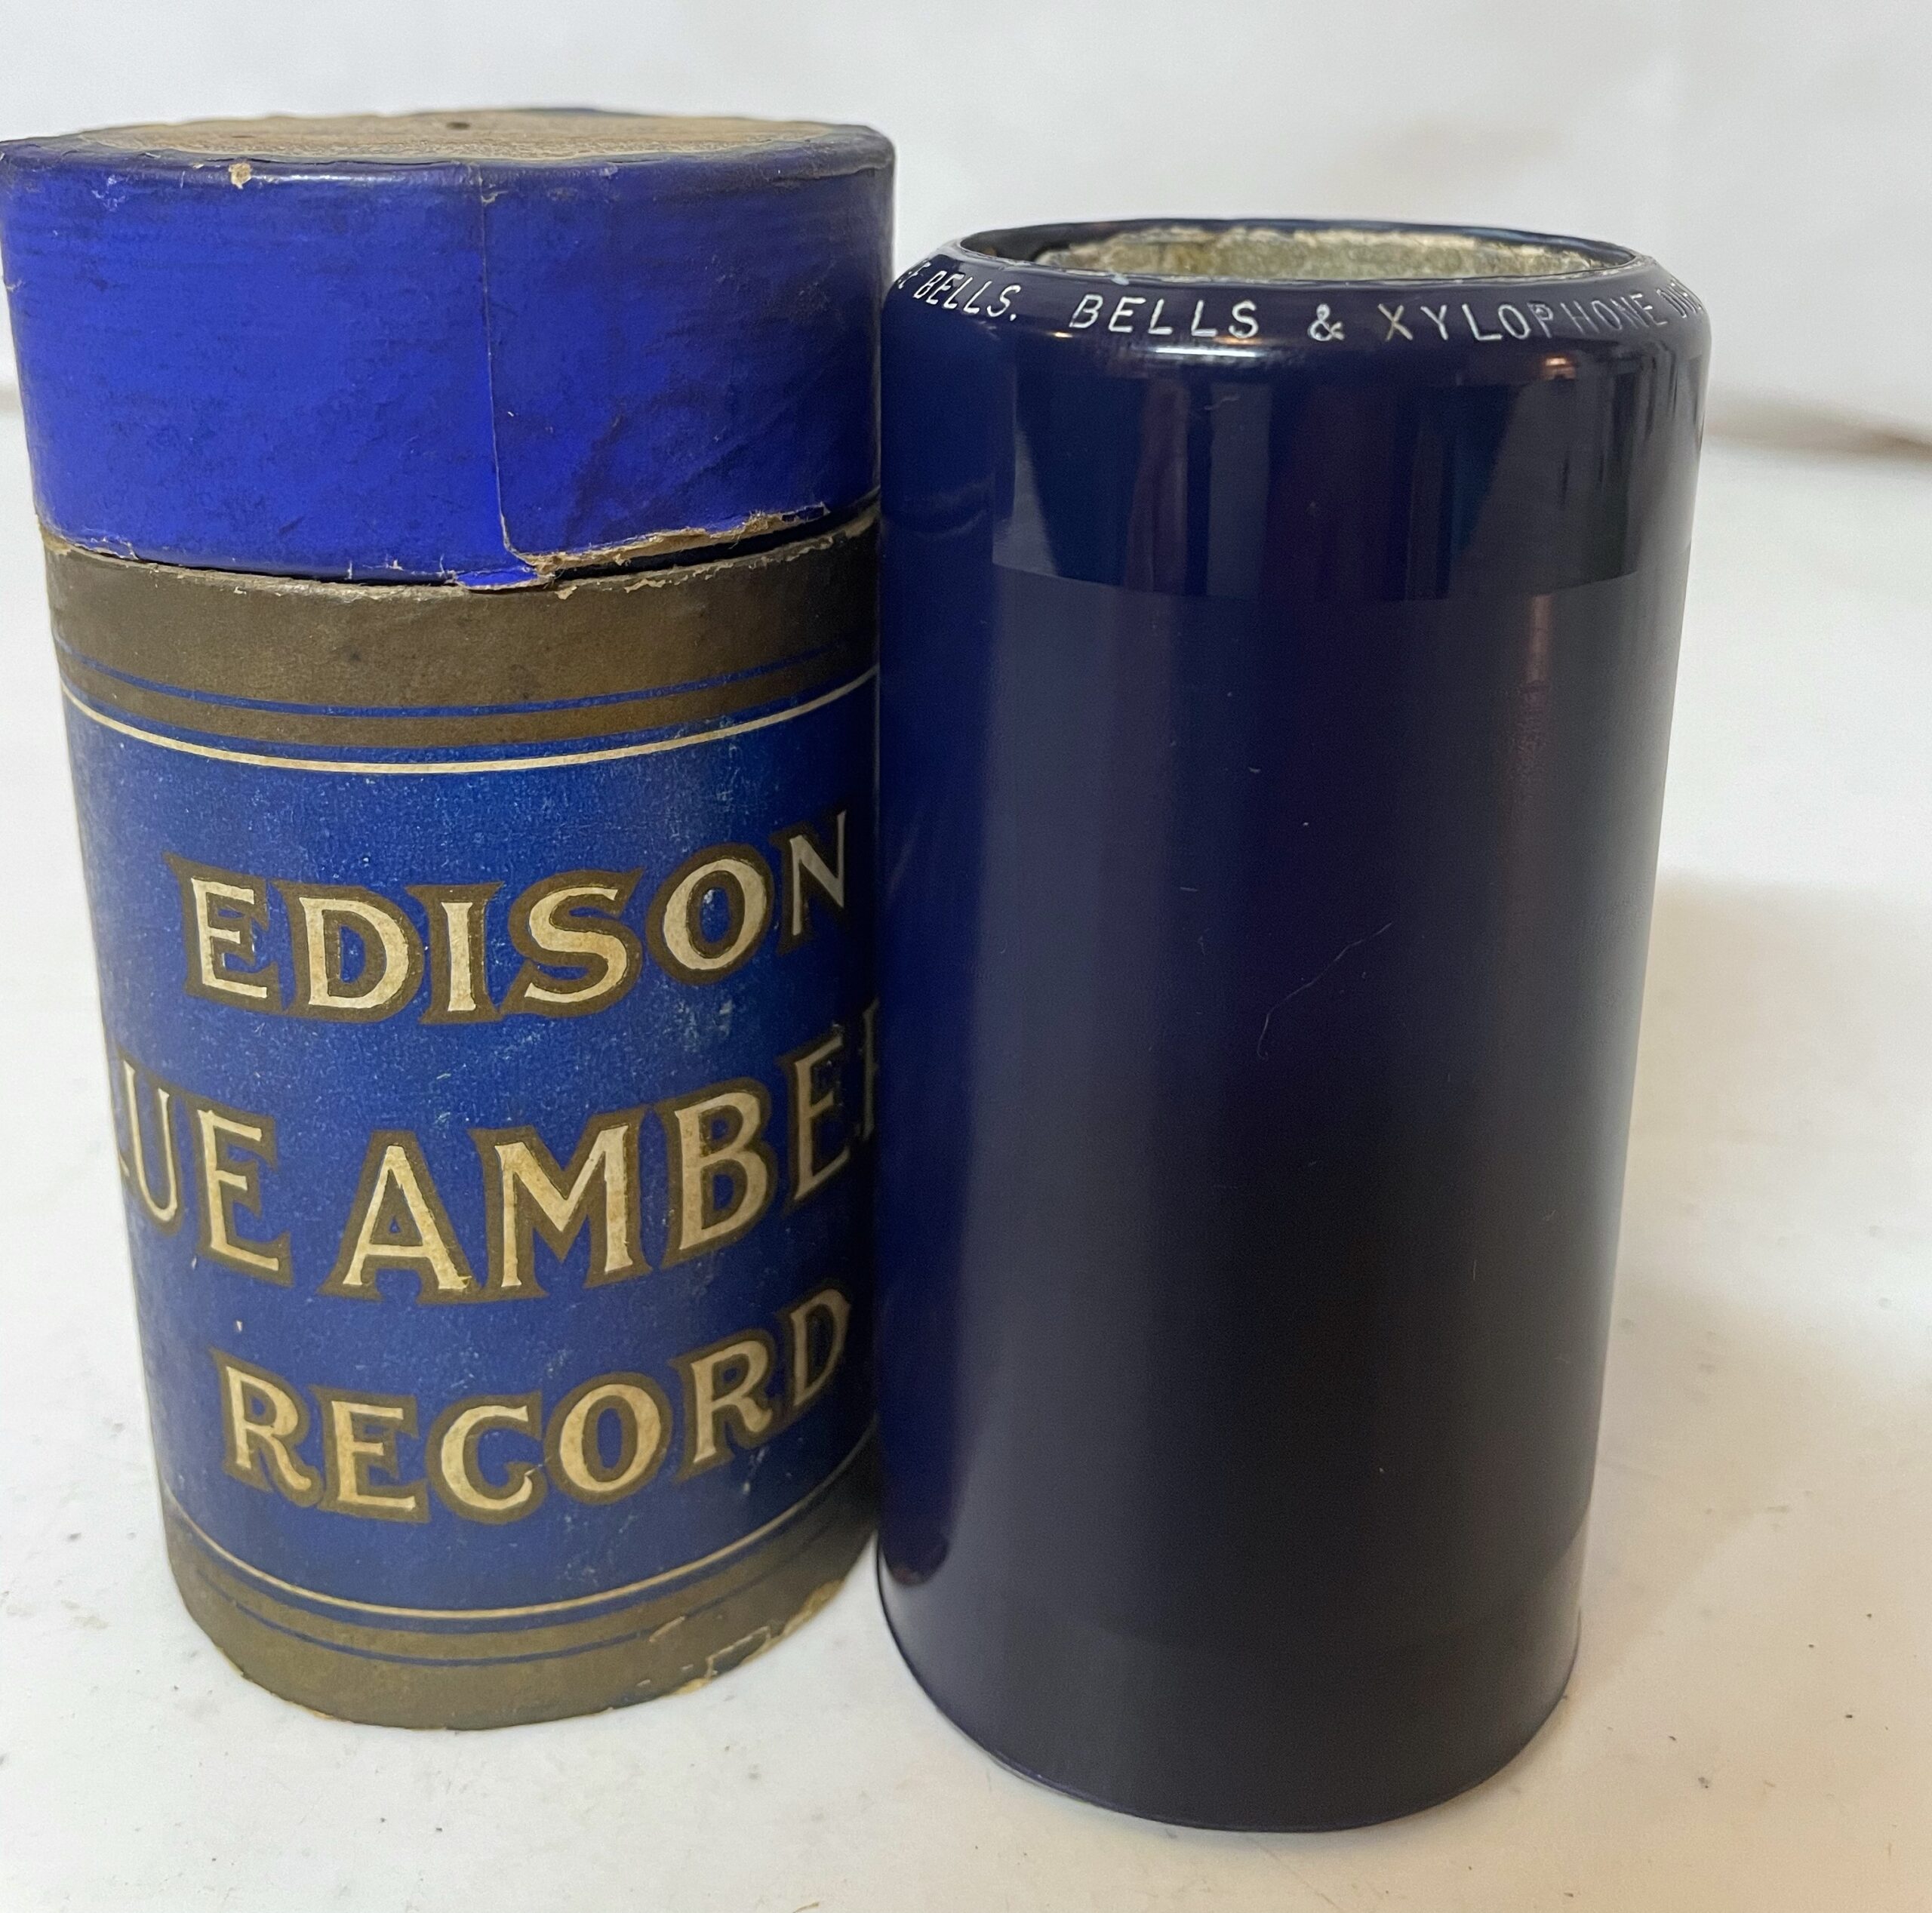 Edison 4 min. Cylinder… “They’ve got Me Doin’ It Now”